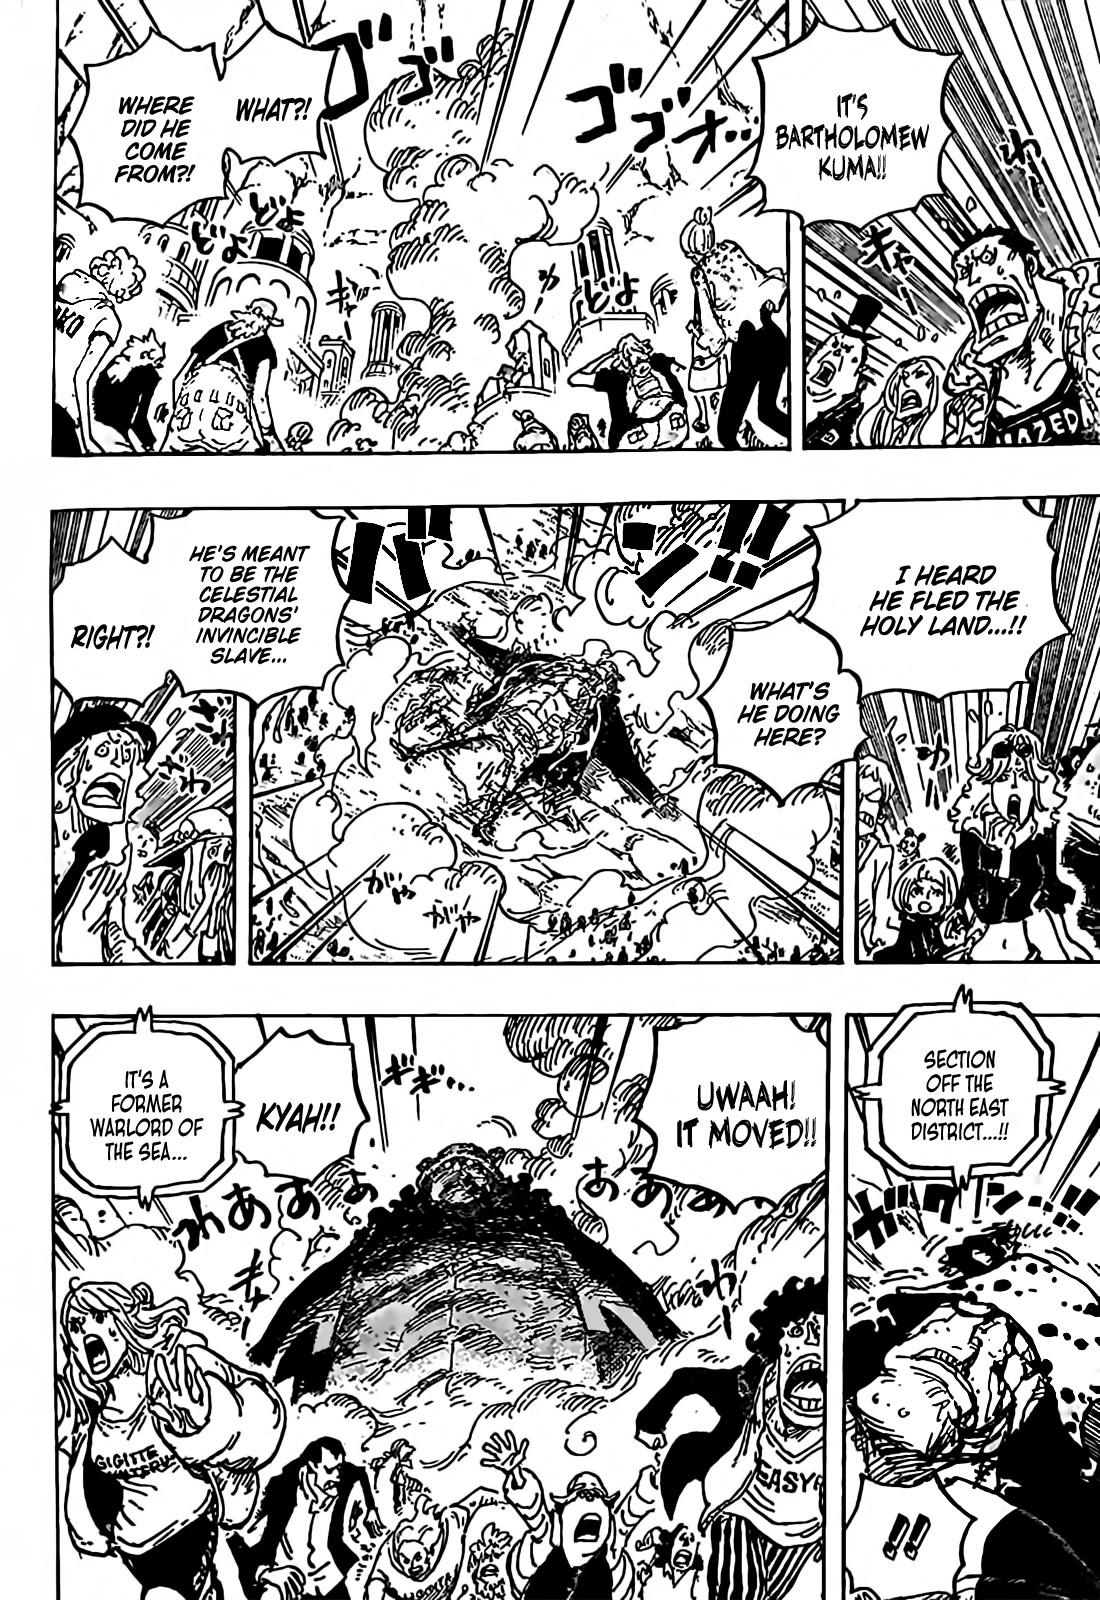 One Piece Chapter 1071 - Kizaru Faces Luffy Sun God with the Power of Buster  Call! (Expectations) 